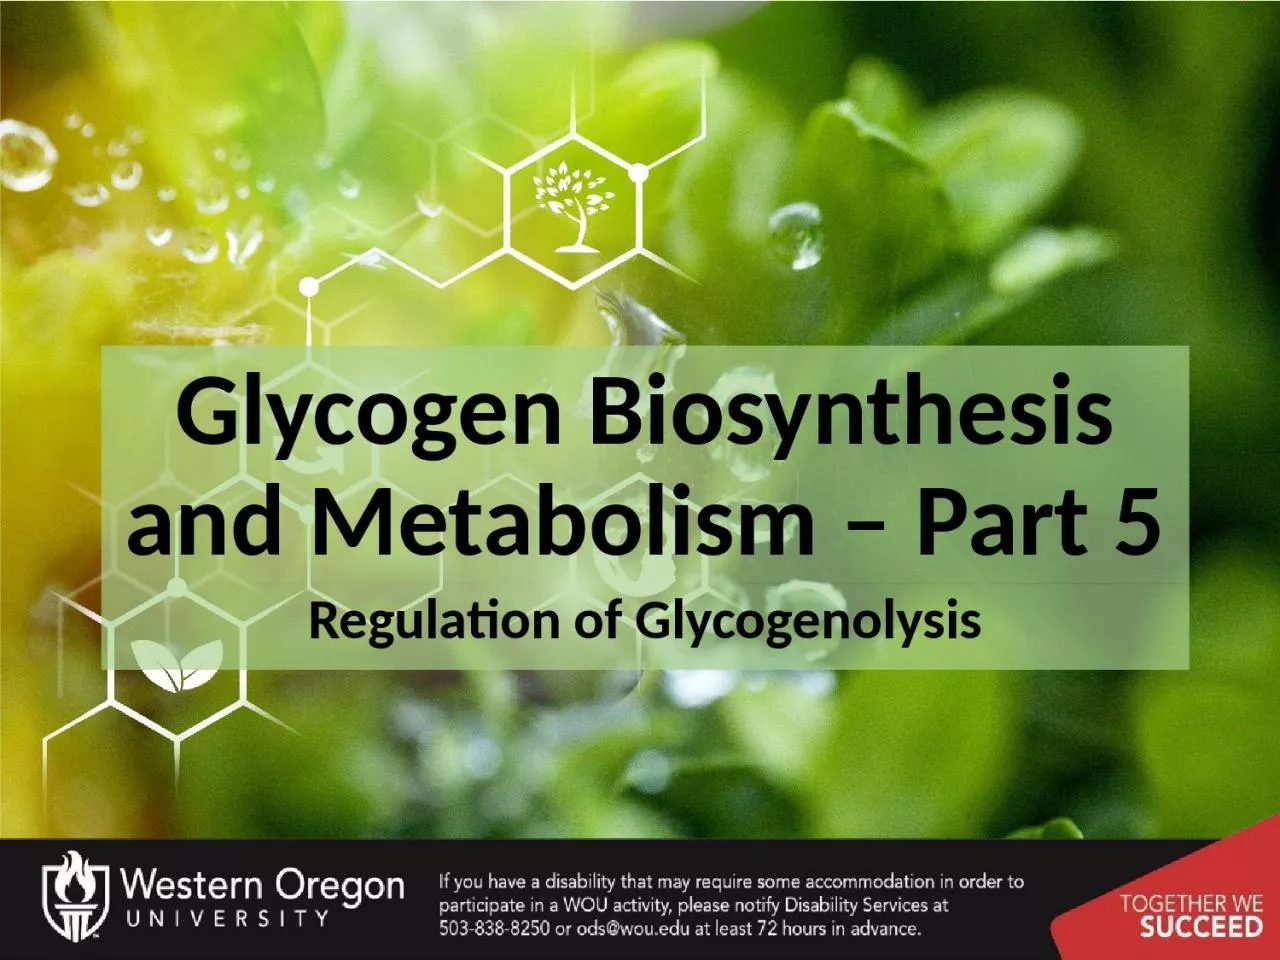 Glycogen Biosynthesis and Metabolism – Part 5